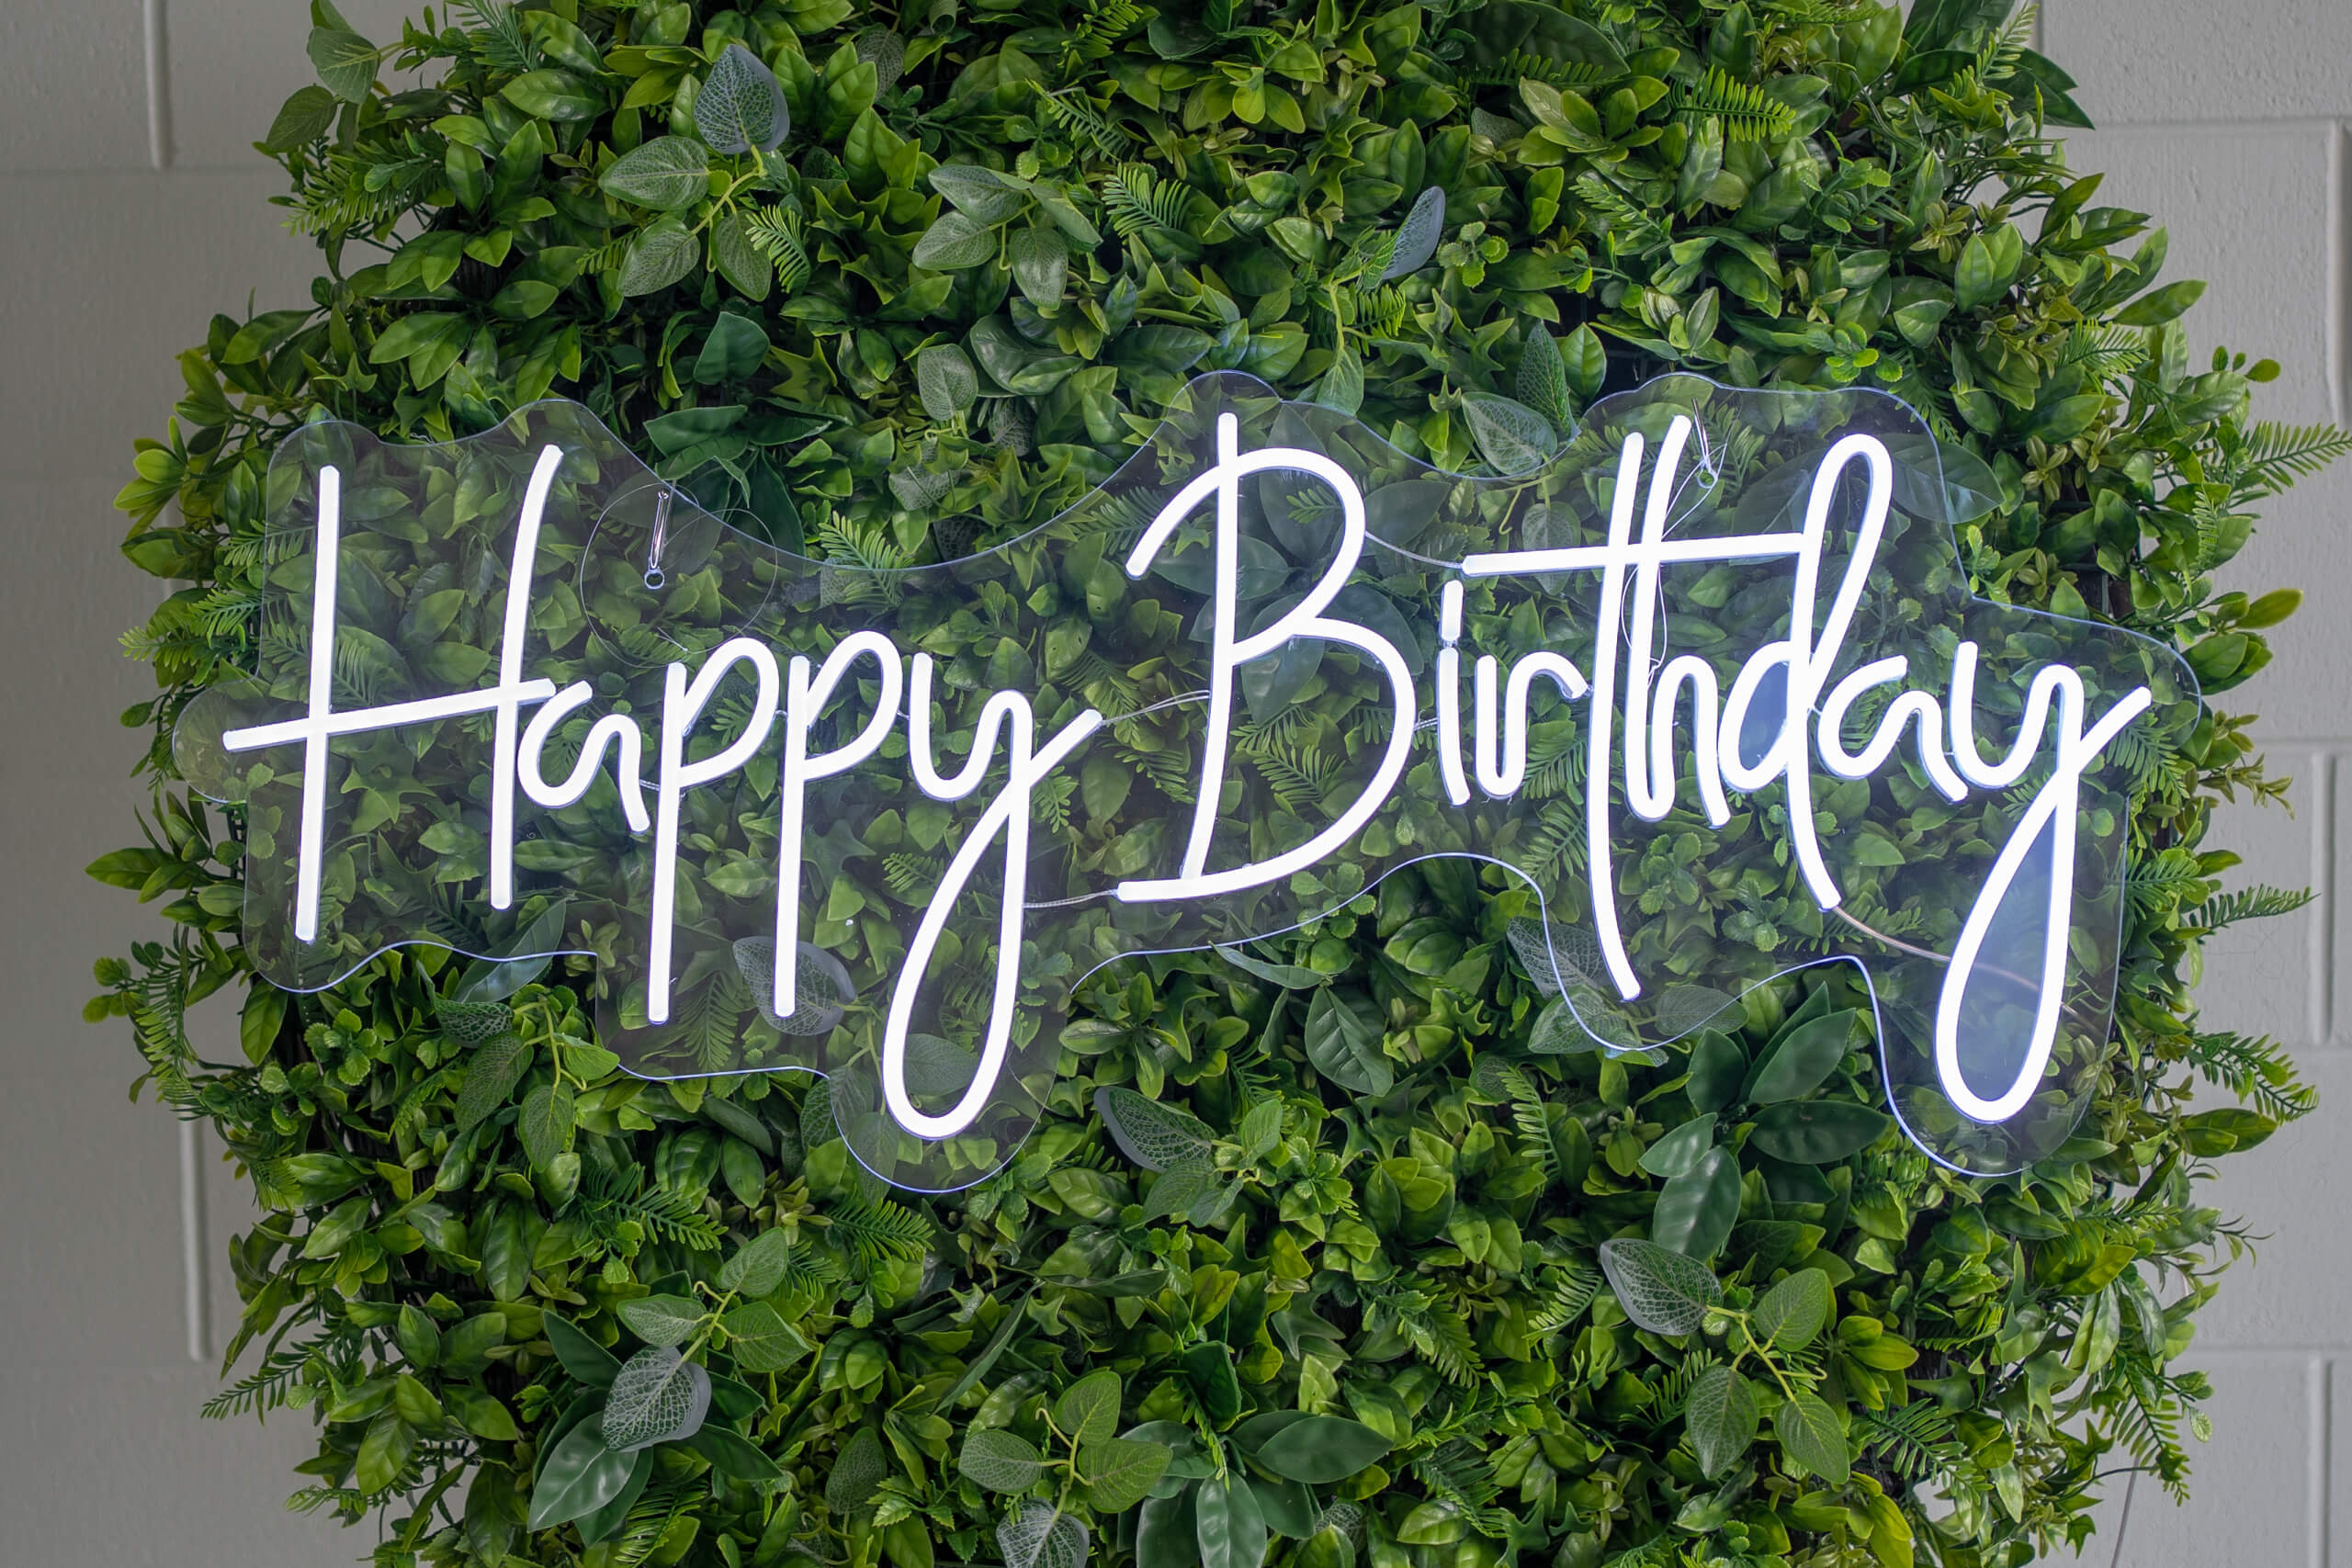 https://www.covers.co.nz/wp-content/uploads/2022/08/Happy-Birthday-Sign-Style1-Closeup.jpg